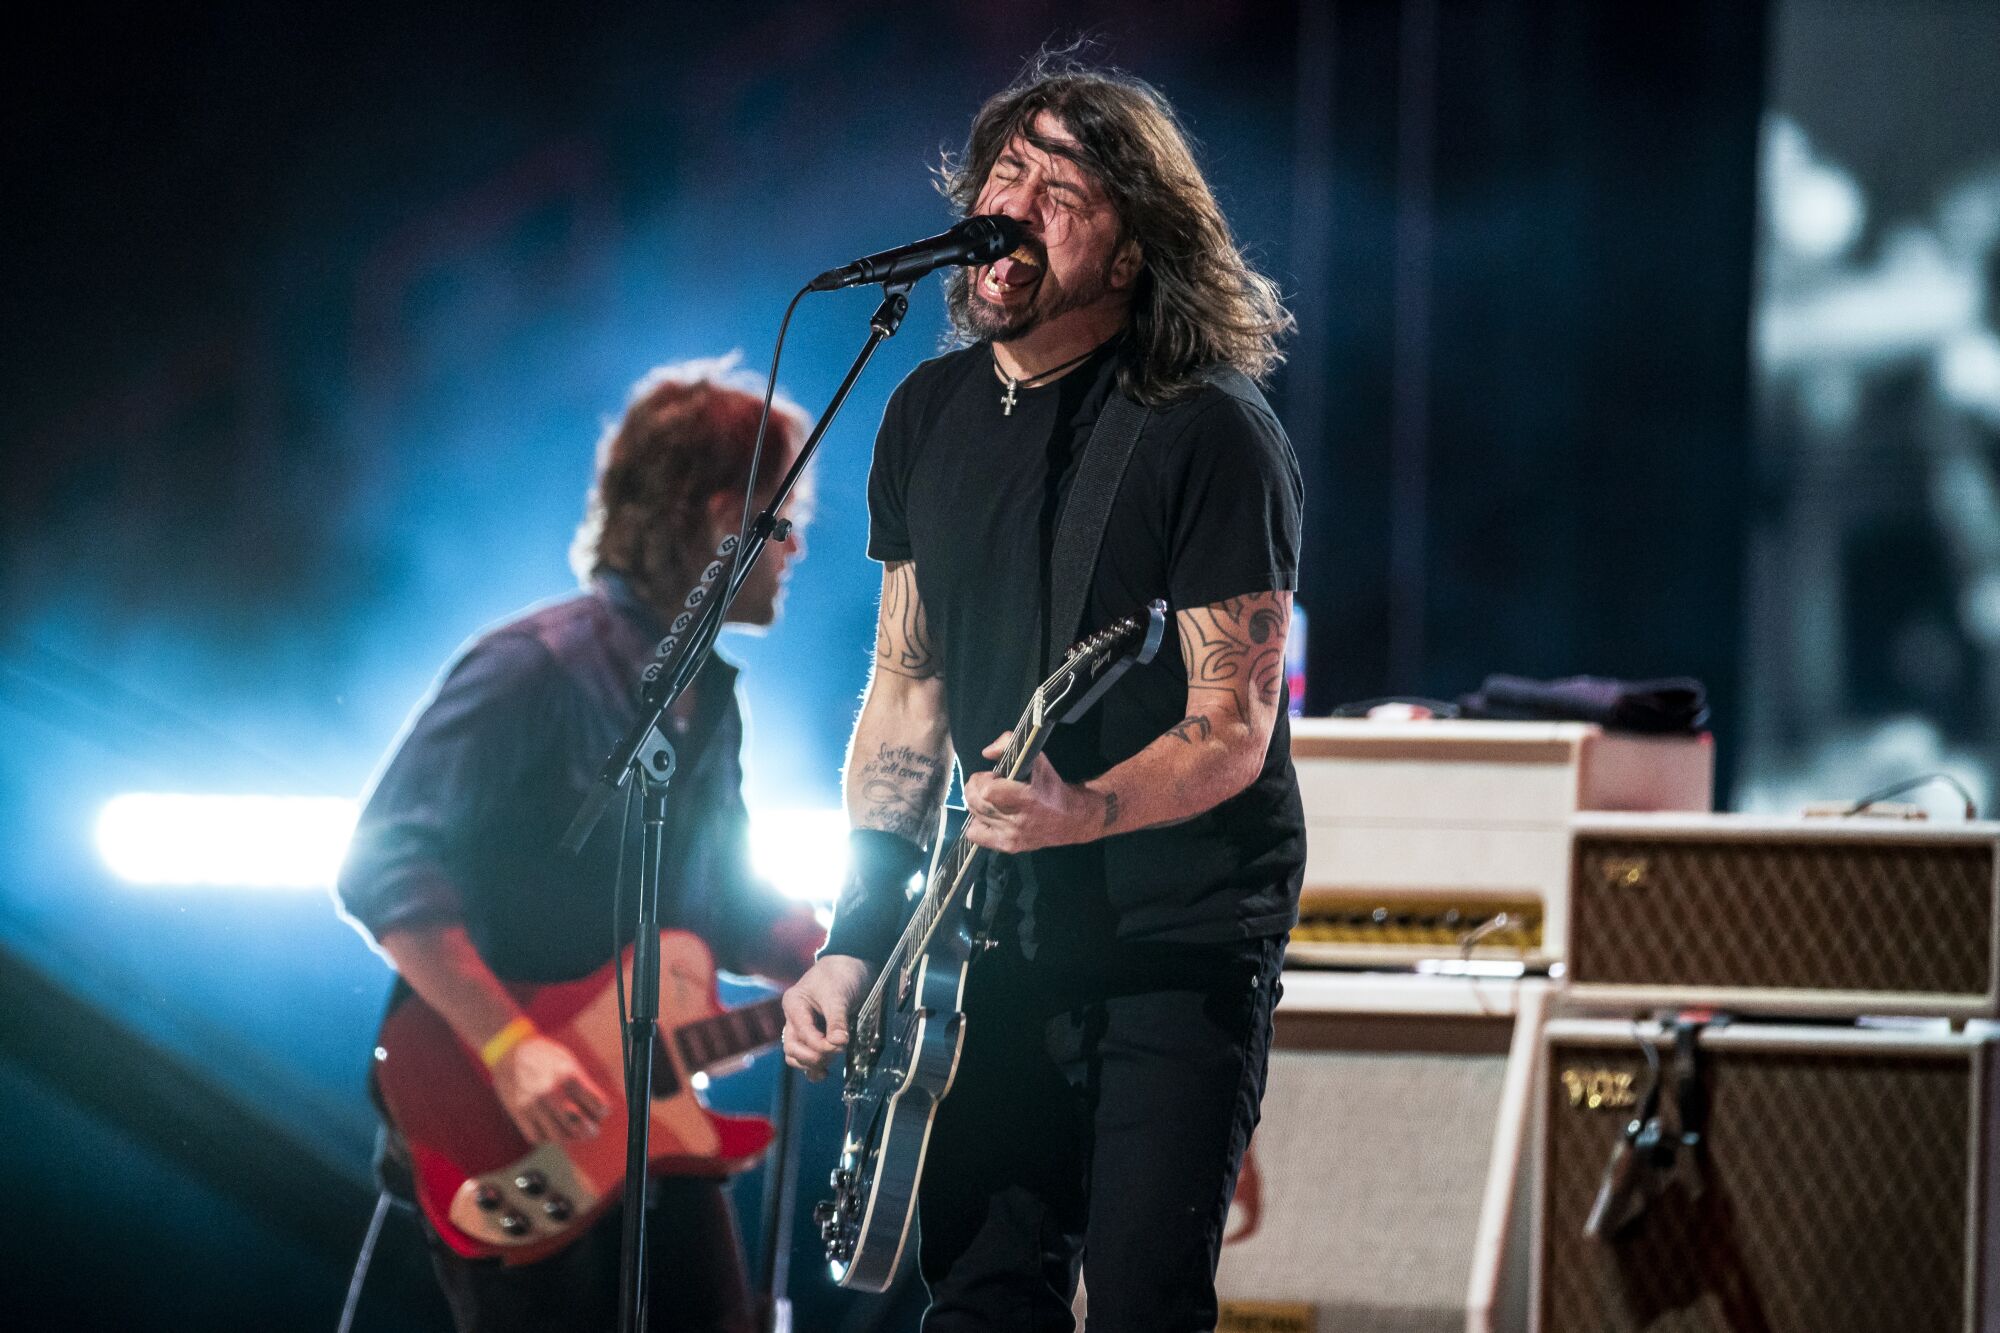 The Foo Fighters perform at the Vax Live concert at SoFi Stadium 